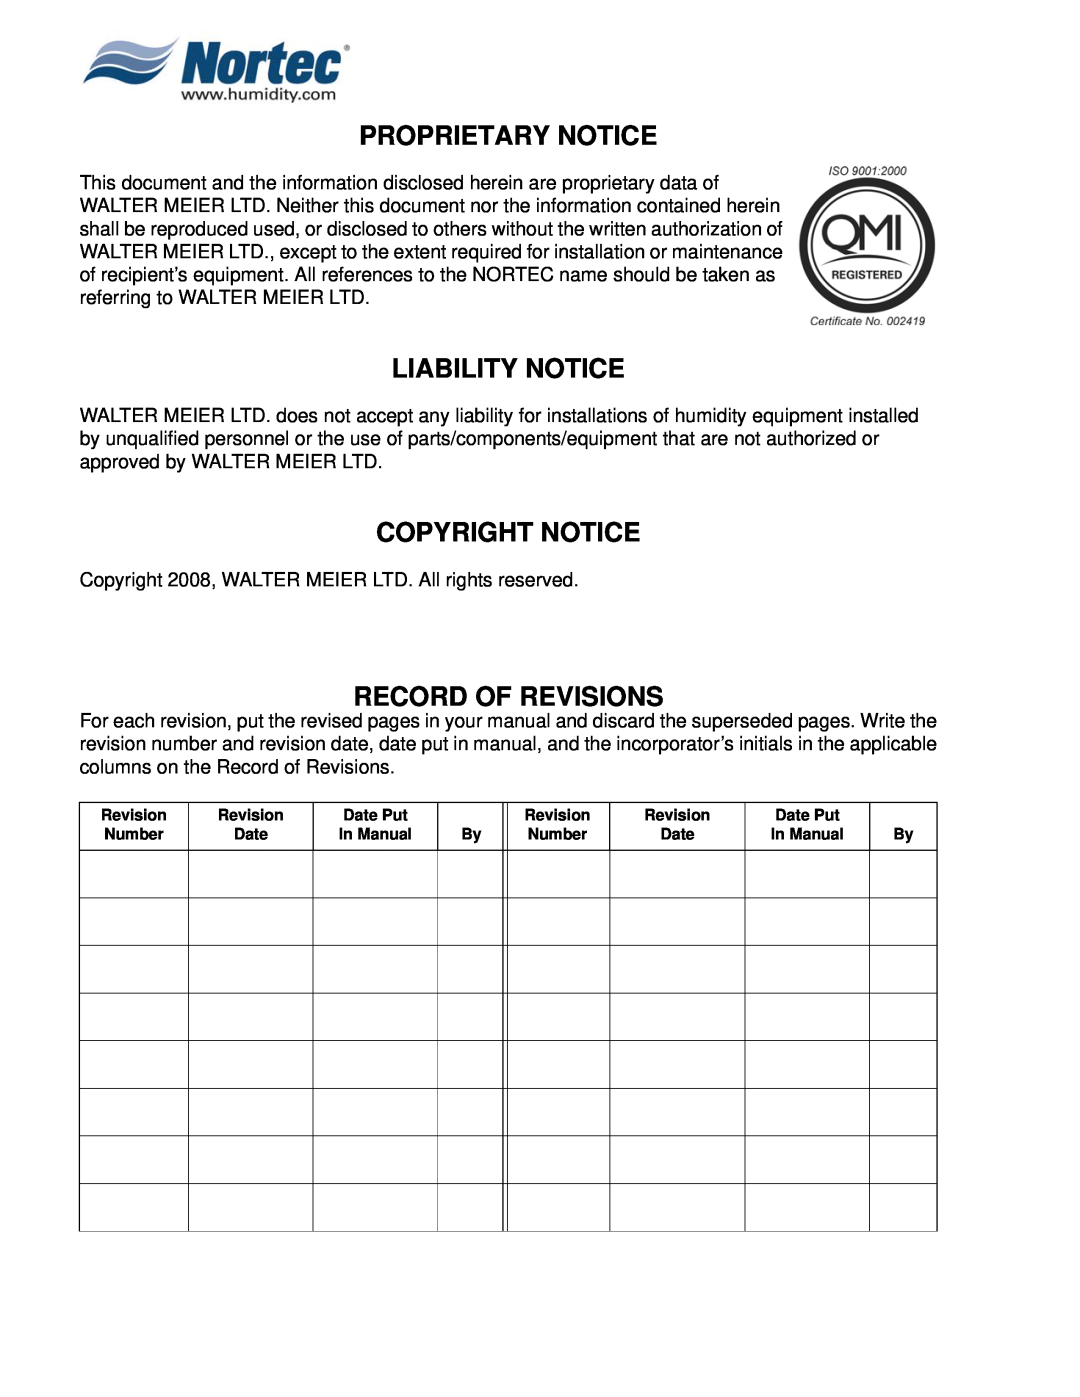 Nortec MH Series Proprietary Notice, Liability Notice, Copyright Notice, Record Of Revisions, Revision Number 